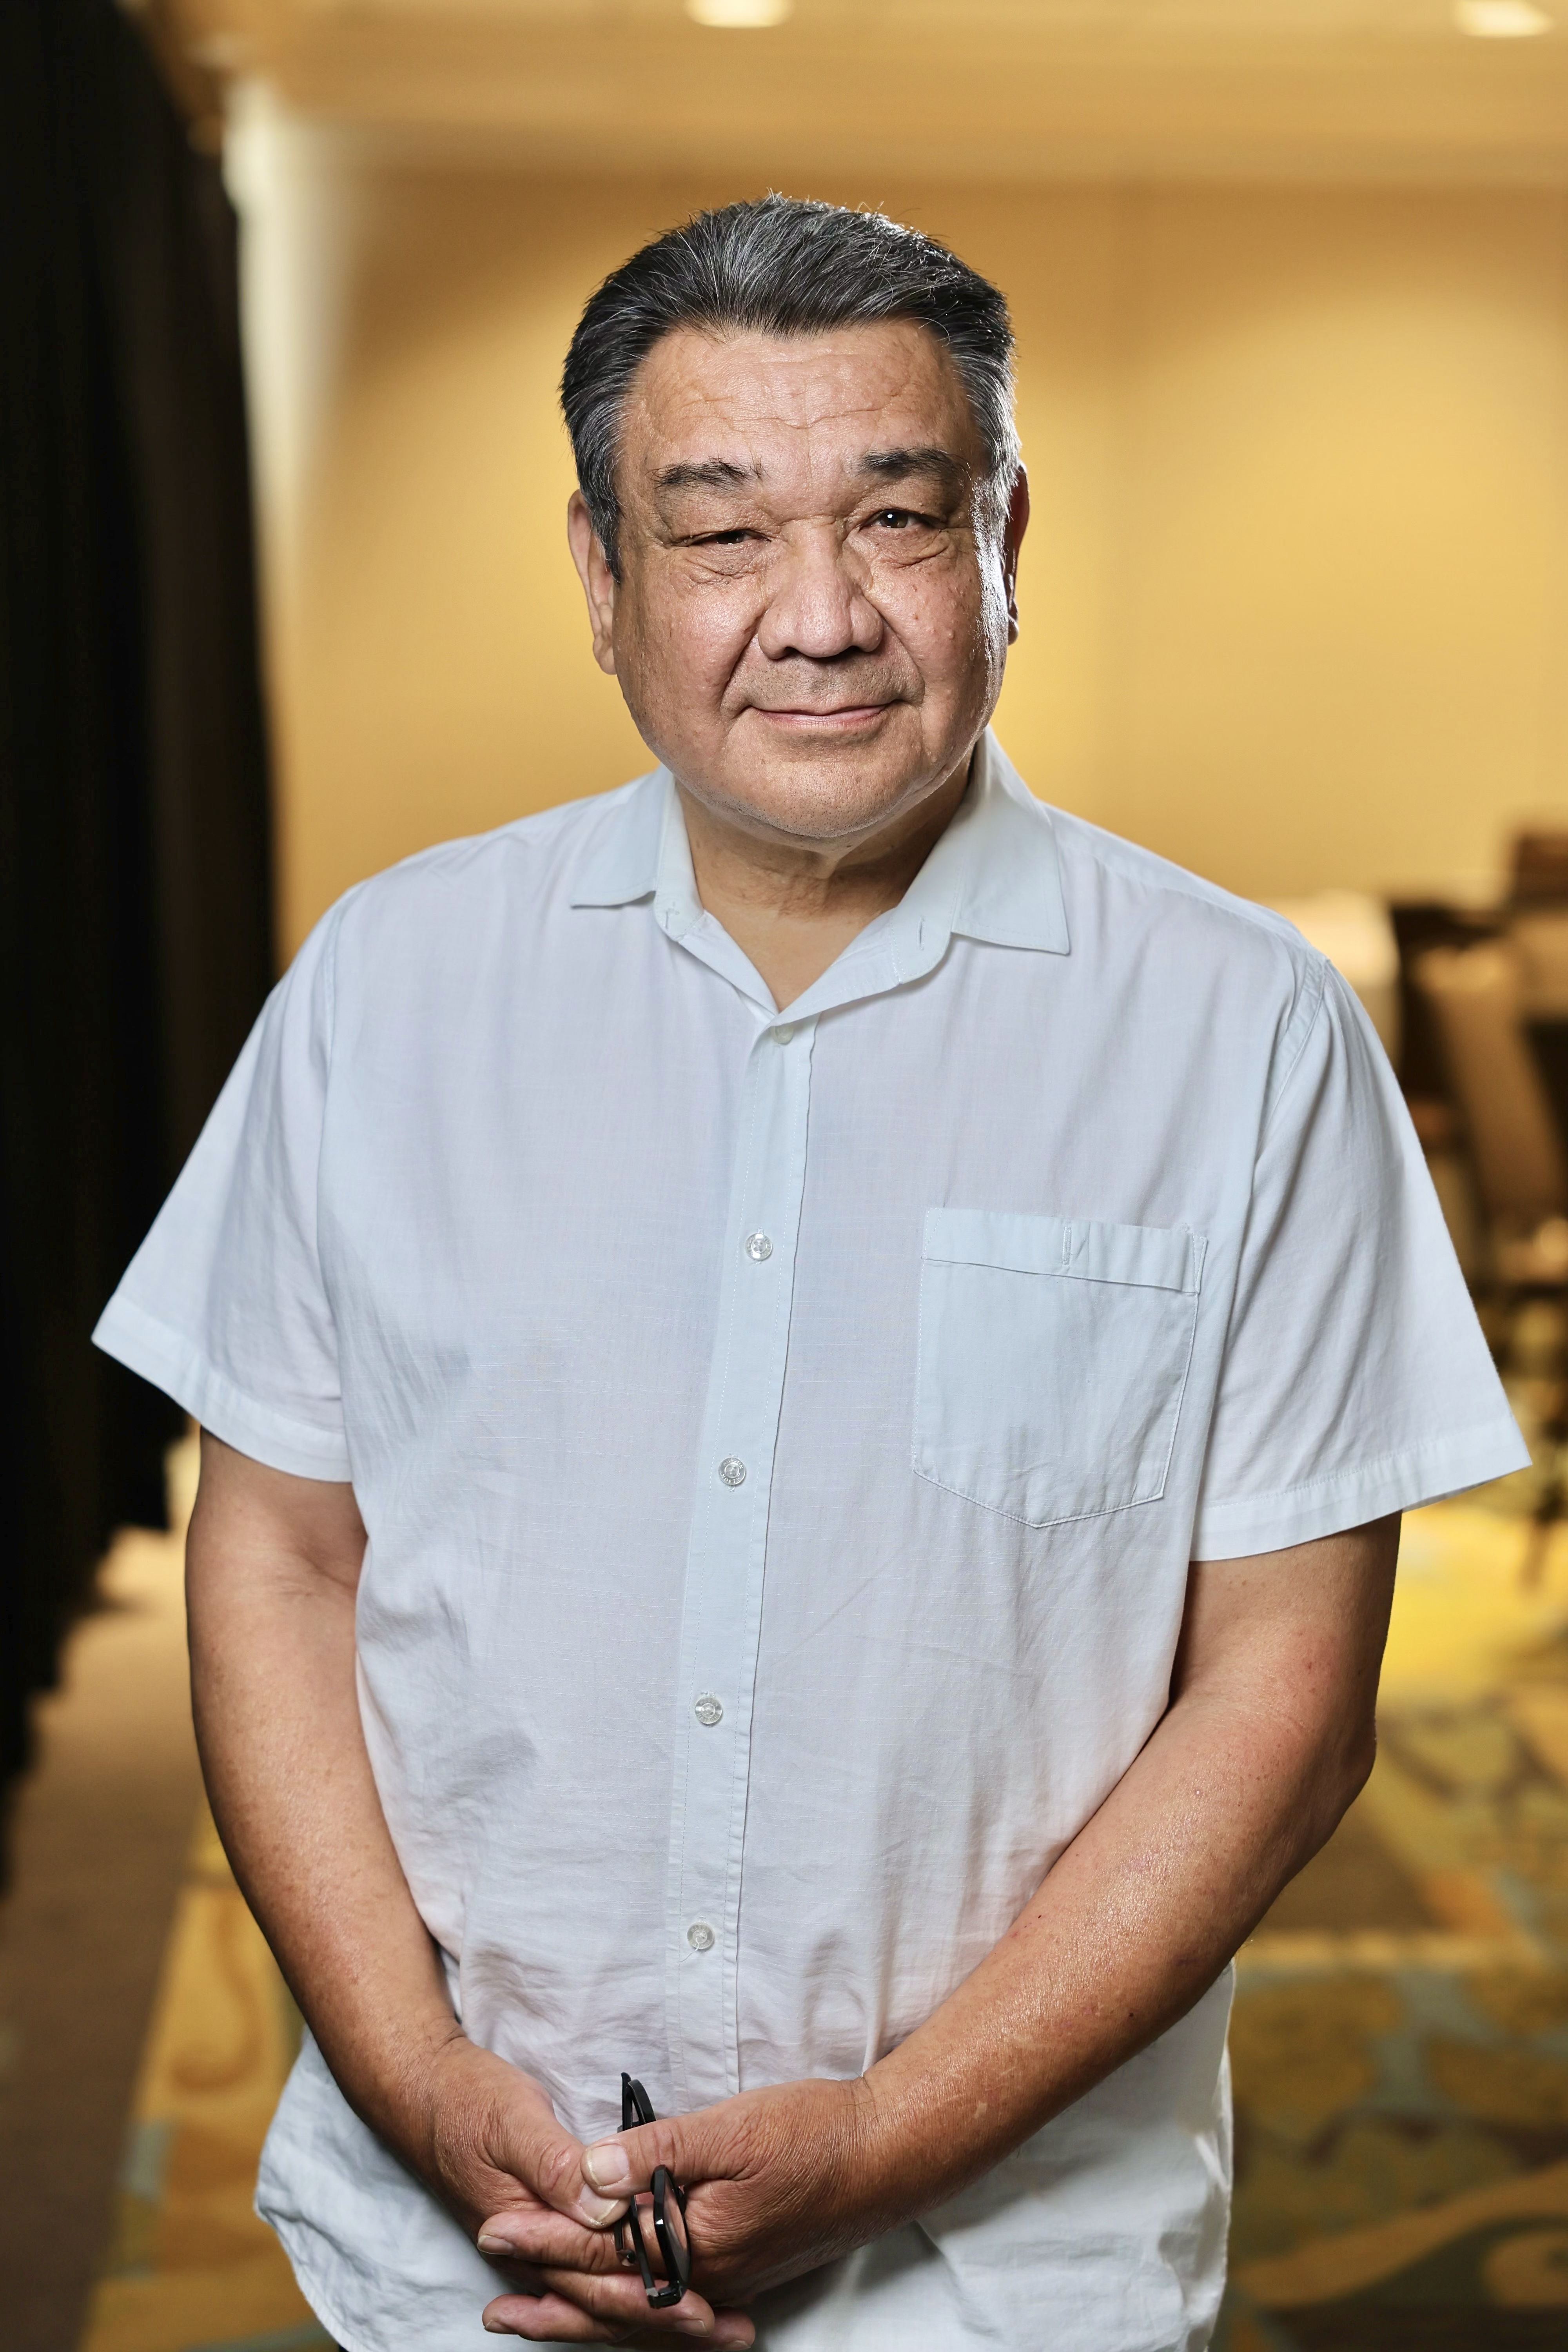 A middle aged man with black and silver hair, who is wearing a light blue button up shirt 